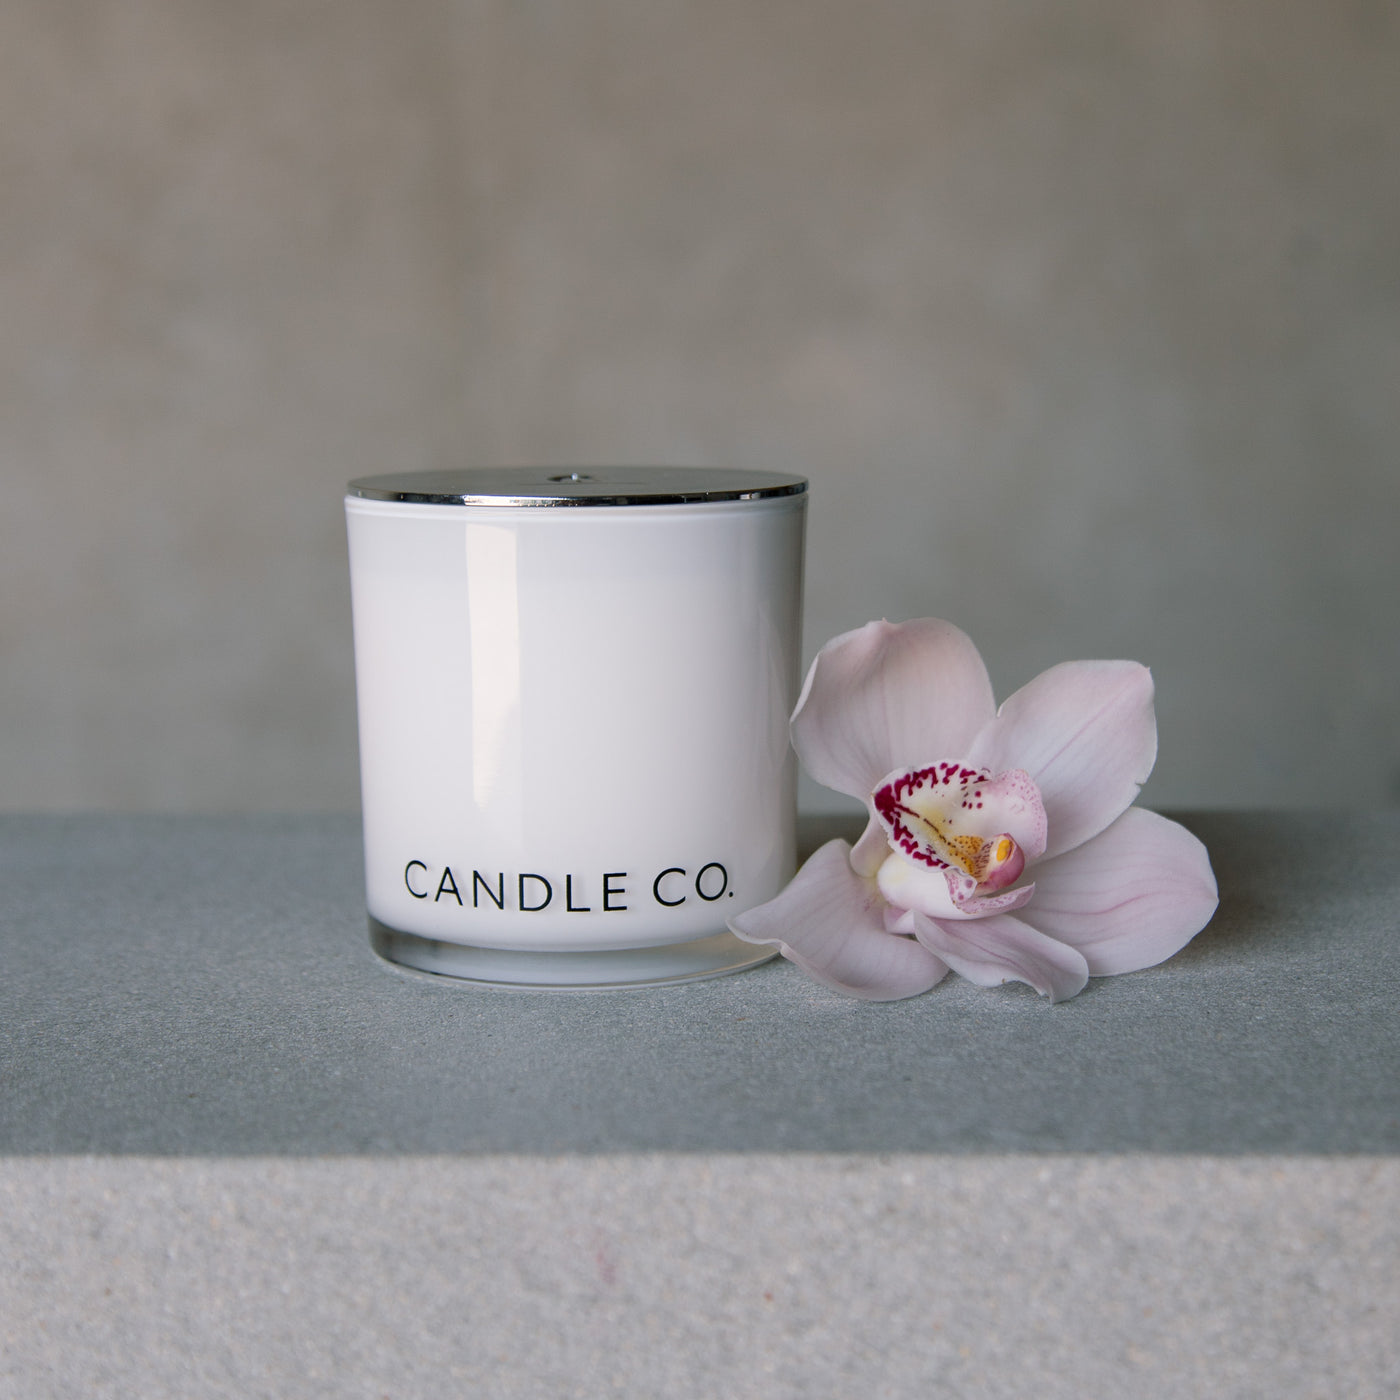 Candle Co 400g Scented Candle and Peach Orchid